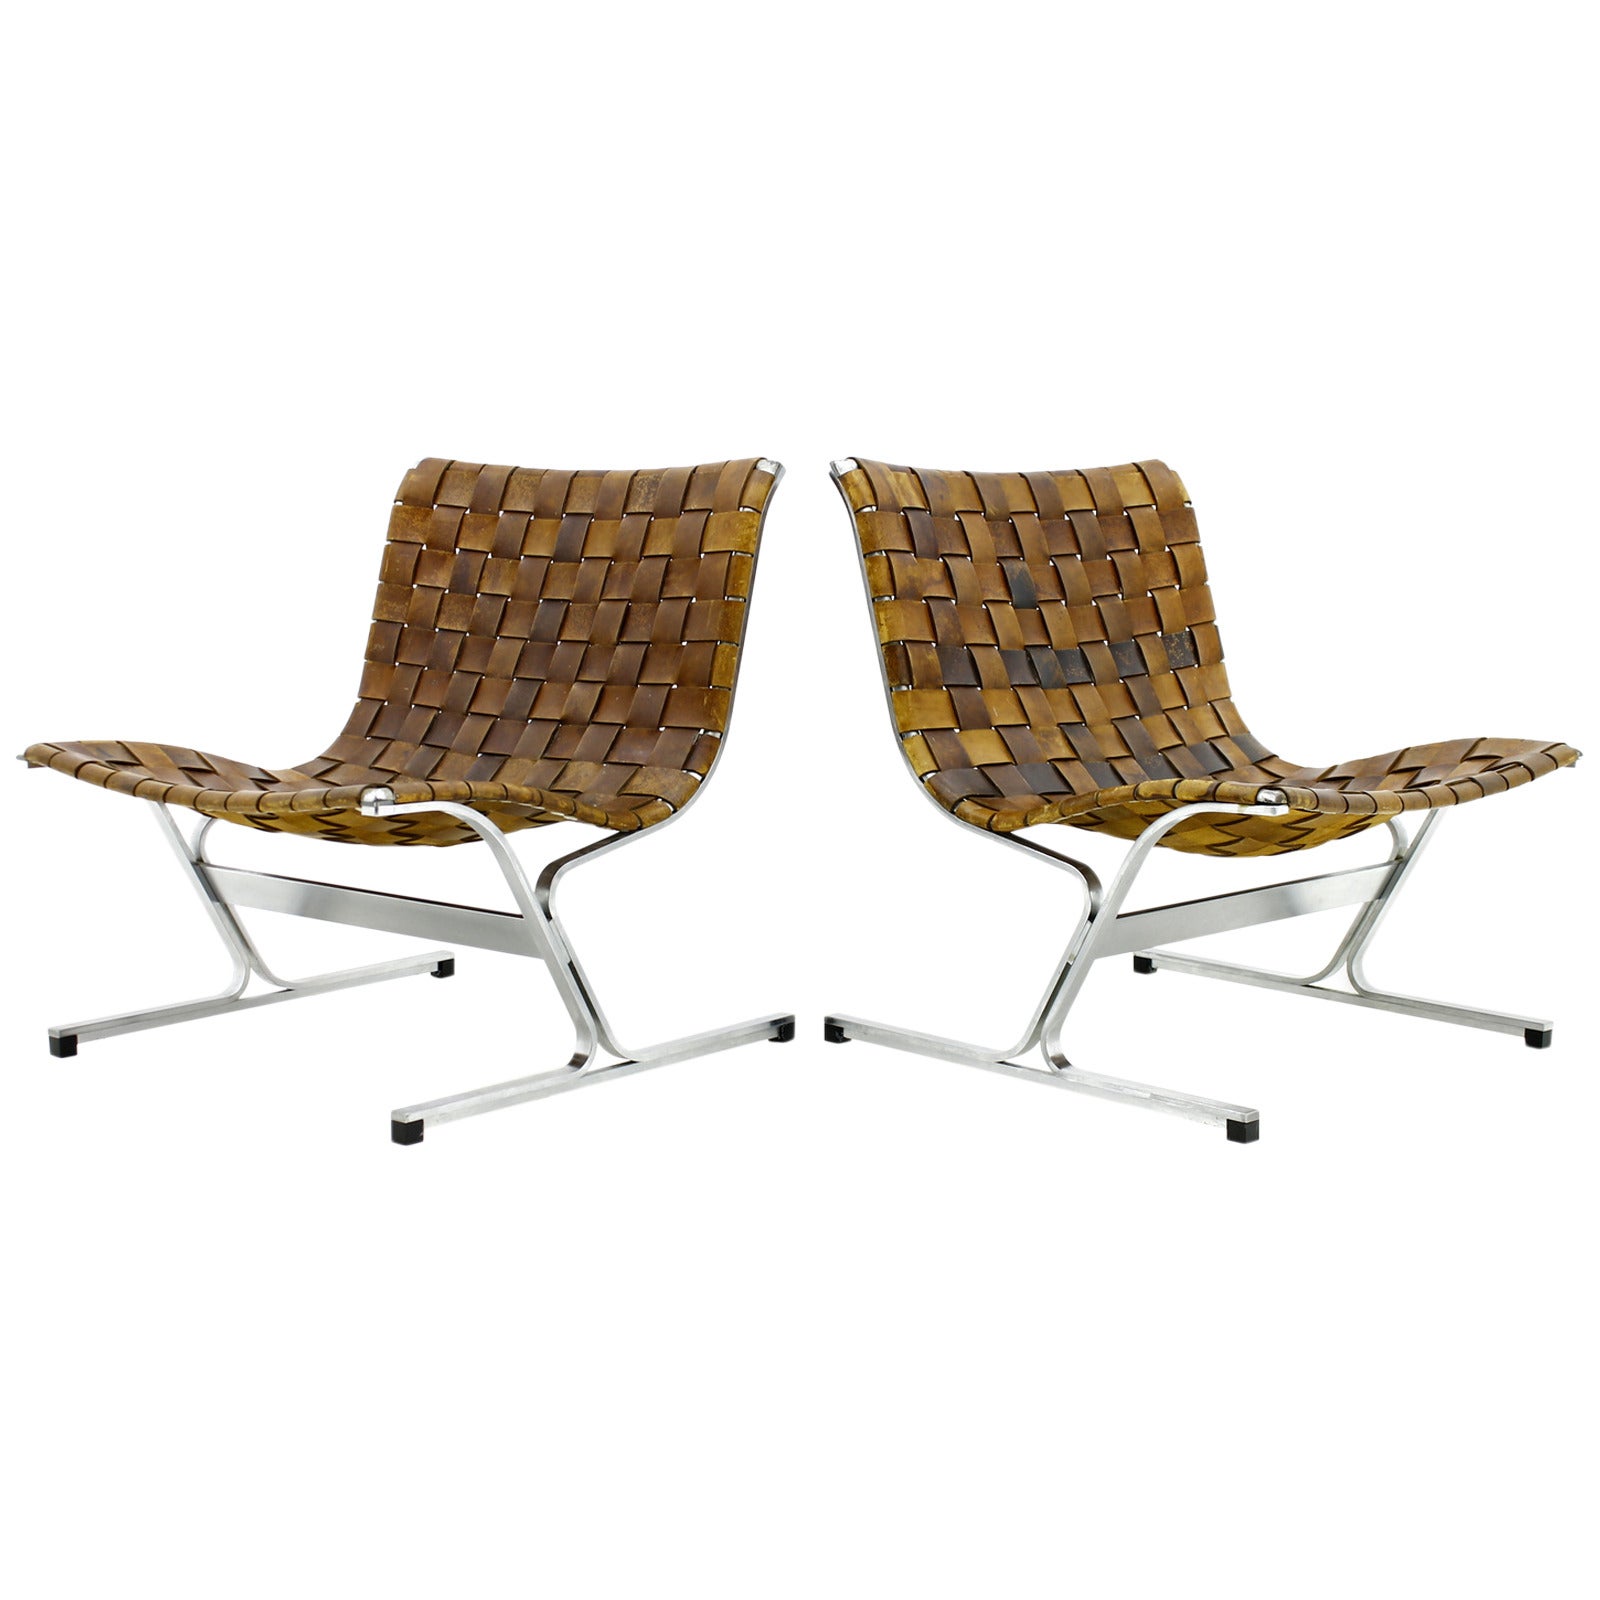 Pair of Leather Lounge Chairs PLR 1 by Ross Littell, Italy, 1968